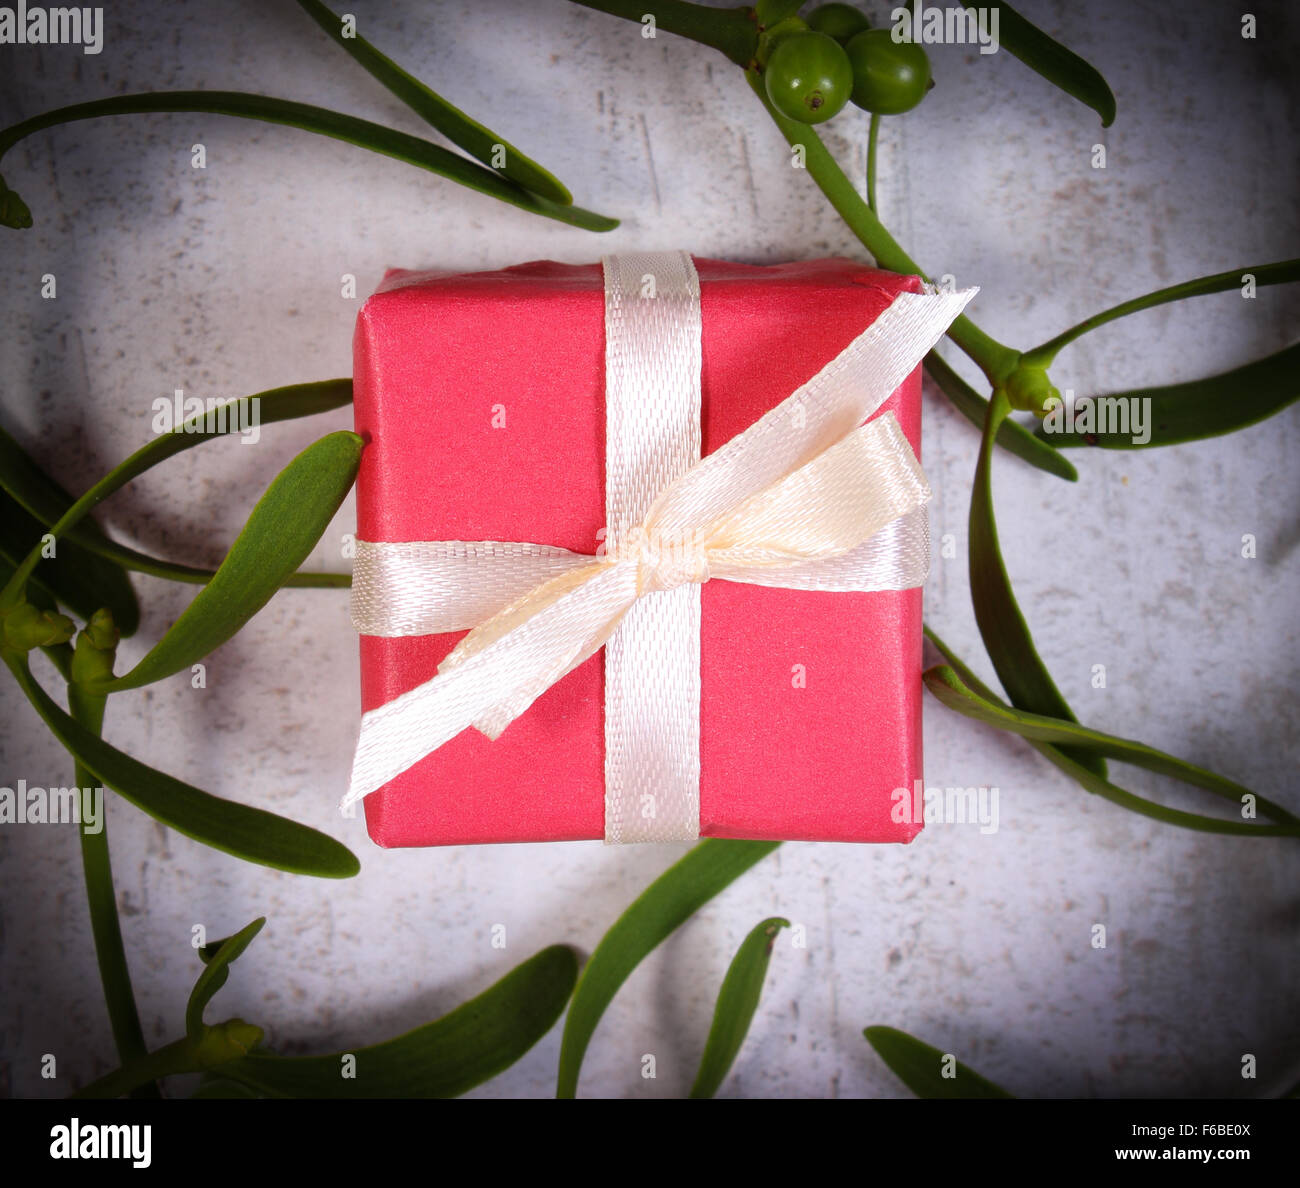 Wrapped red gift for Christmas or other celebration and branch of green mistletoe on old wooden background Stock Photo